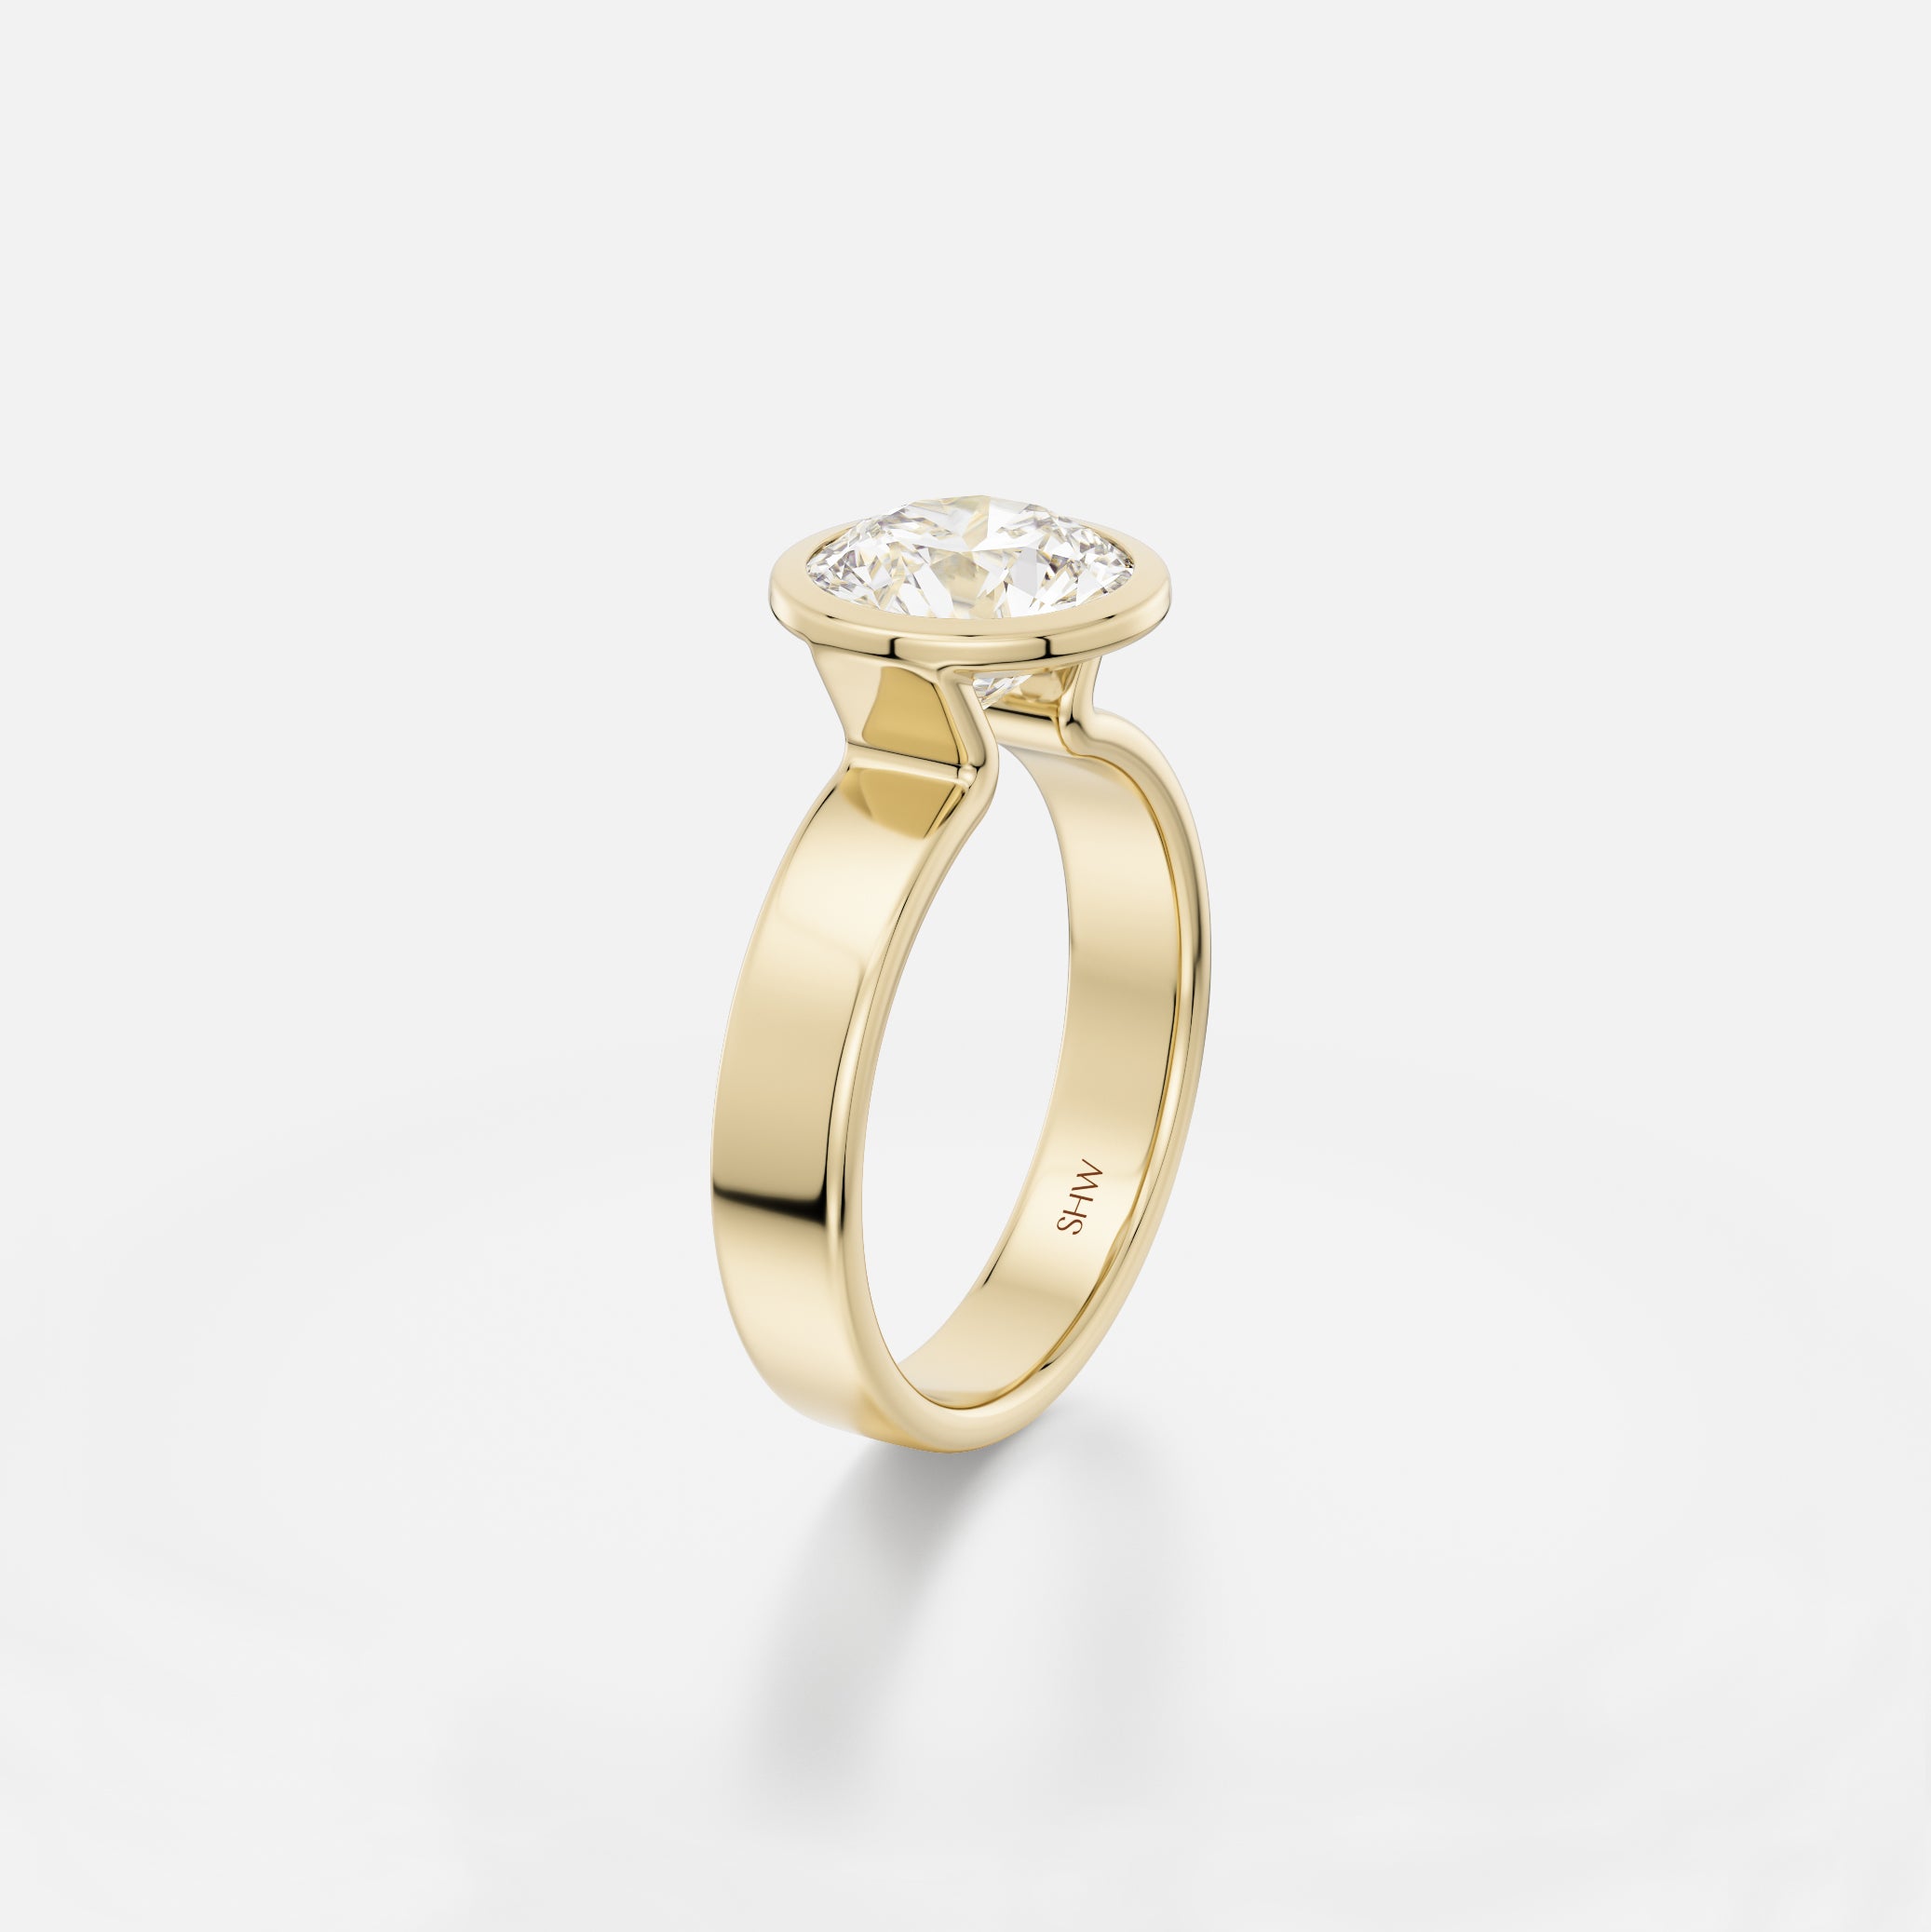 Badi Flat Sculptural Wide Large Band with Round Cut Profile Bezel Set Unique Engagement Ring Setting in recycled 14k Gold or platinum by SHW Fine Jewelry NYC